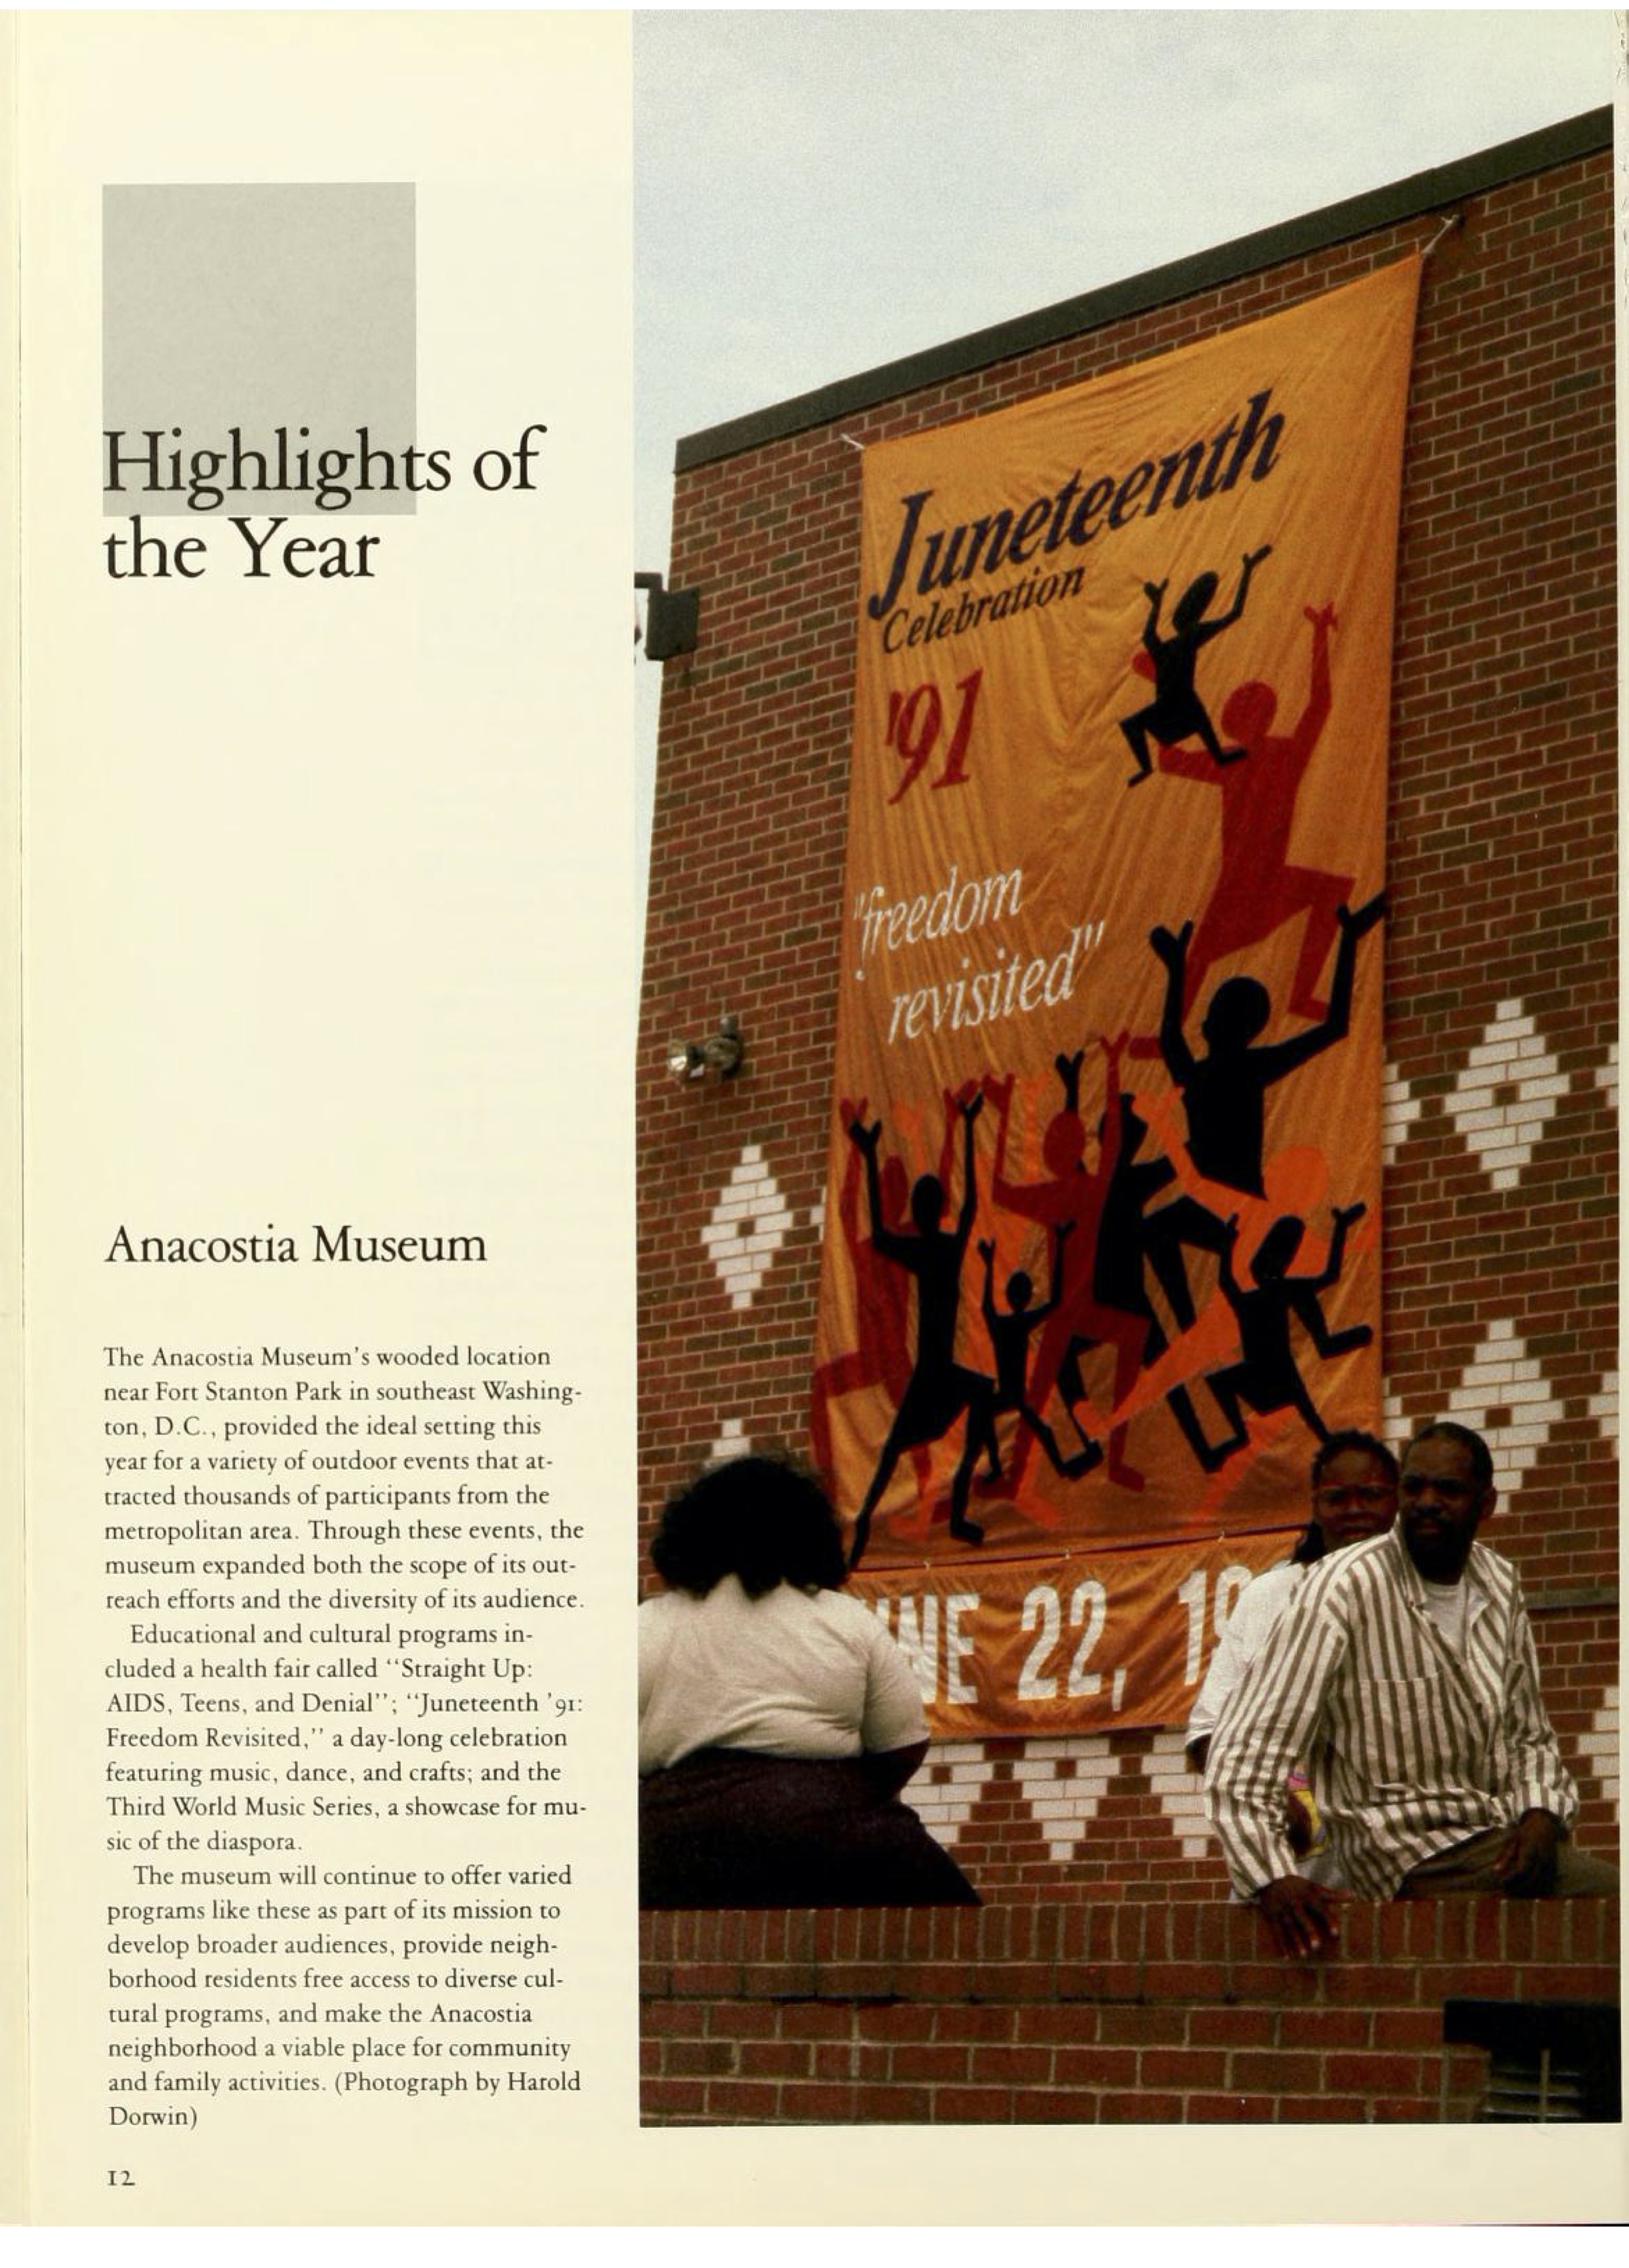 The highlights section about the Anacostia Museum in the annual report pictures a Juneteenth Banner 